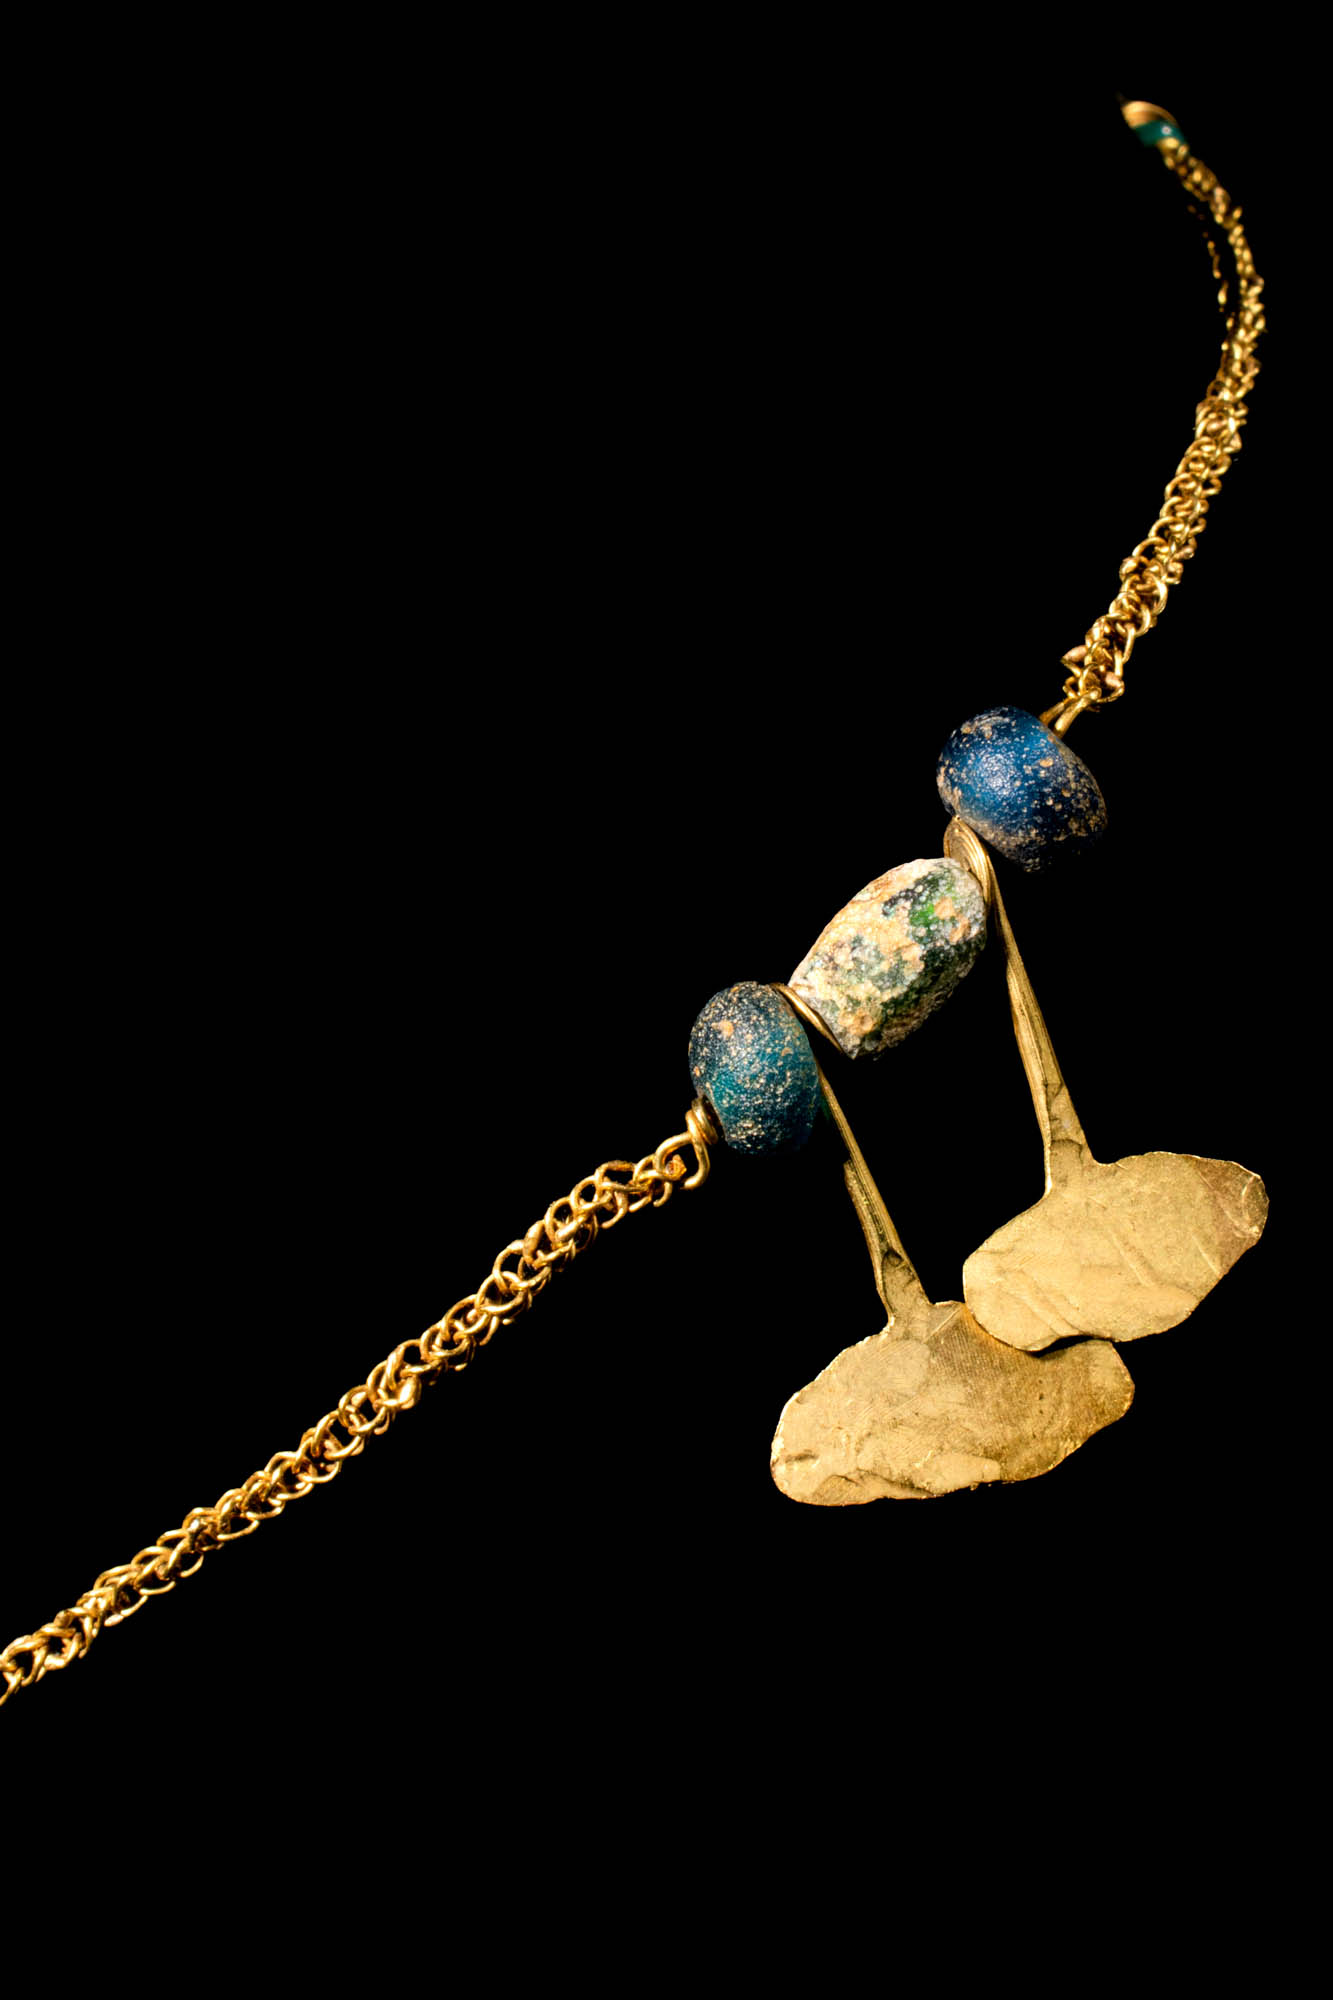 GOLD NECKLACE WITH EGYPTIAN GOLD PENDANTS AND BEADS - Image 8 of 8